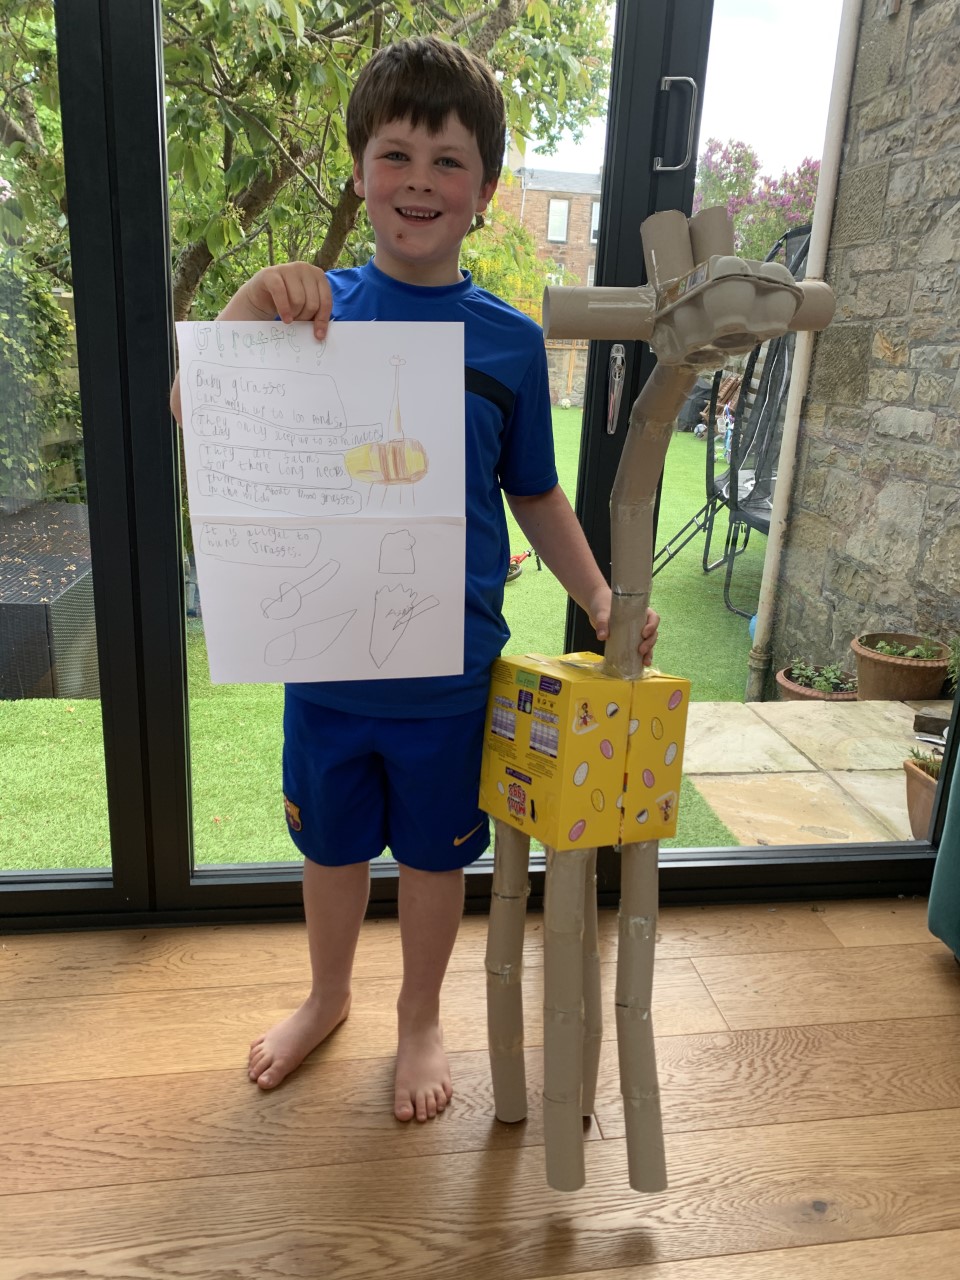 Wilf with his giraffe poster